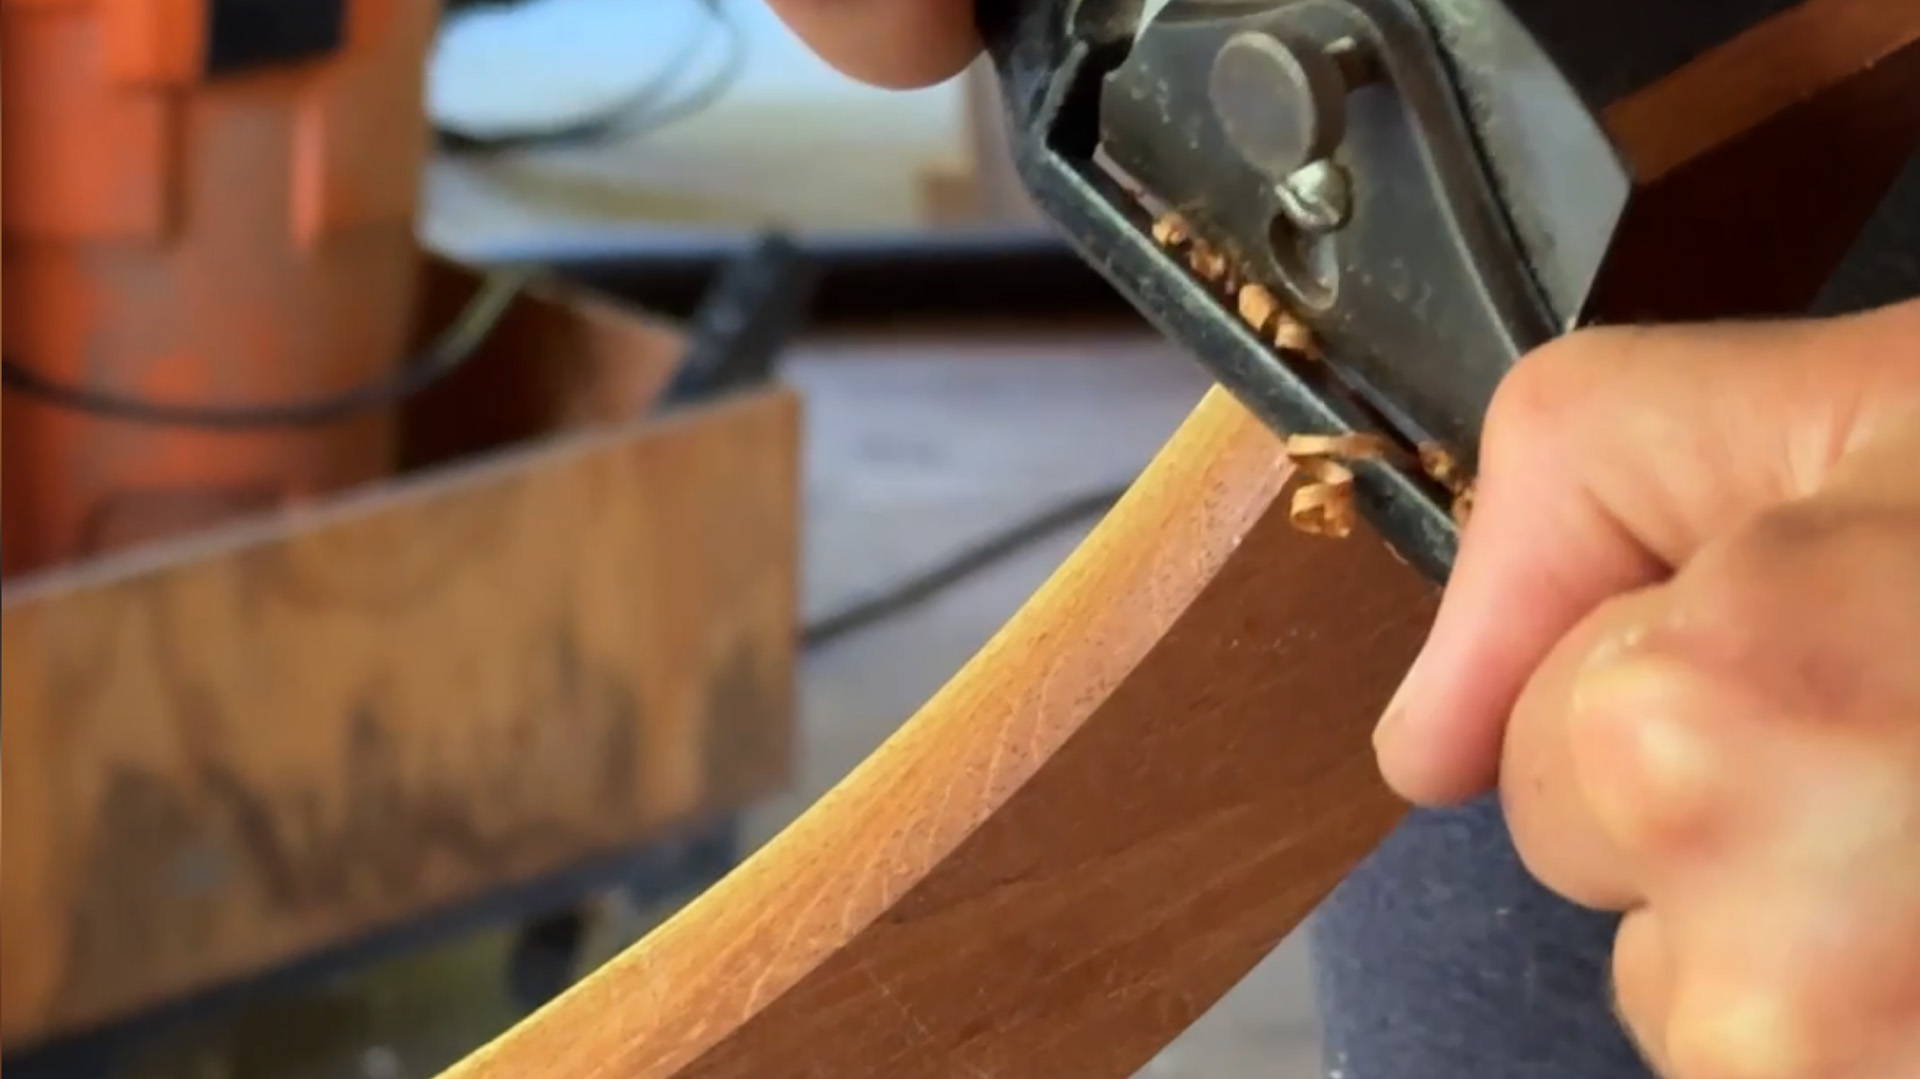 shaping a curved component with a spokeshave